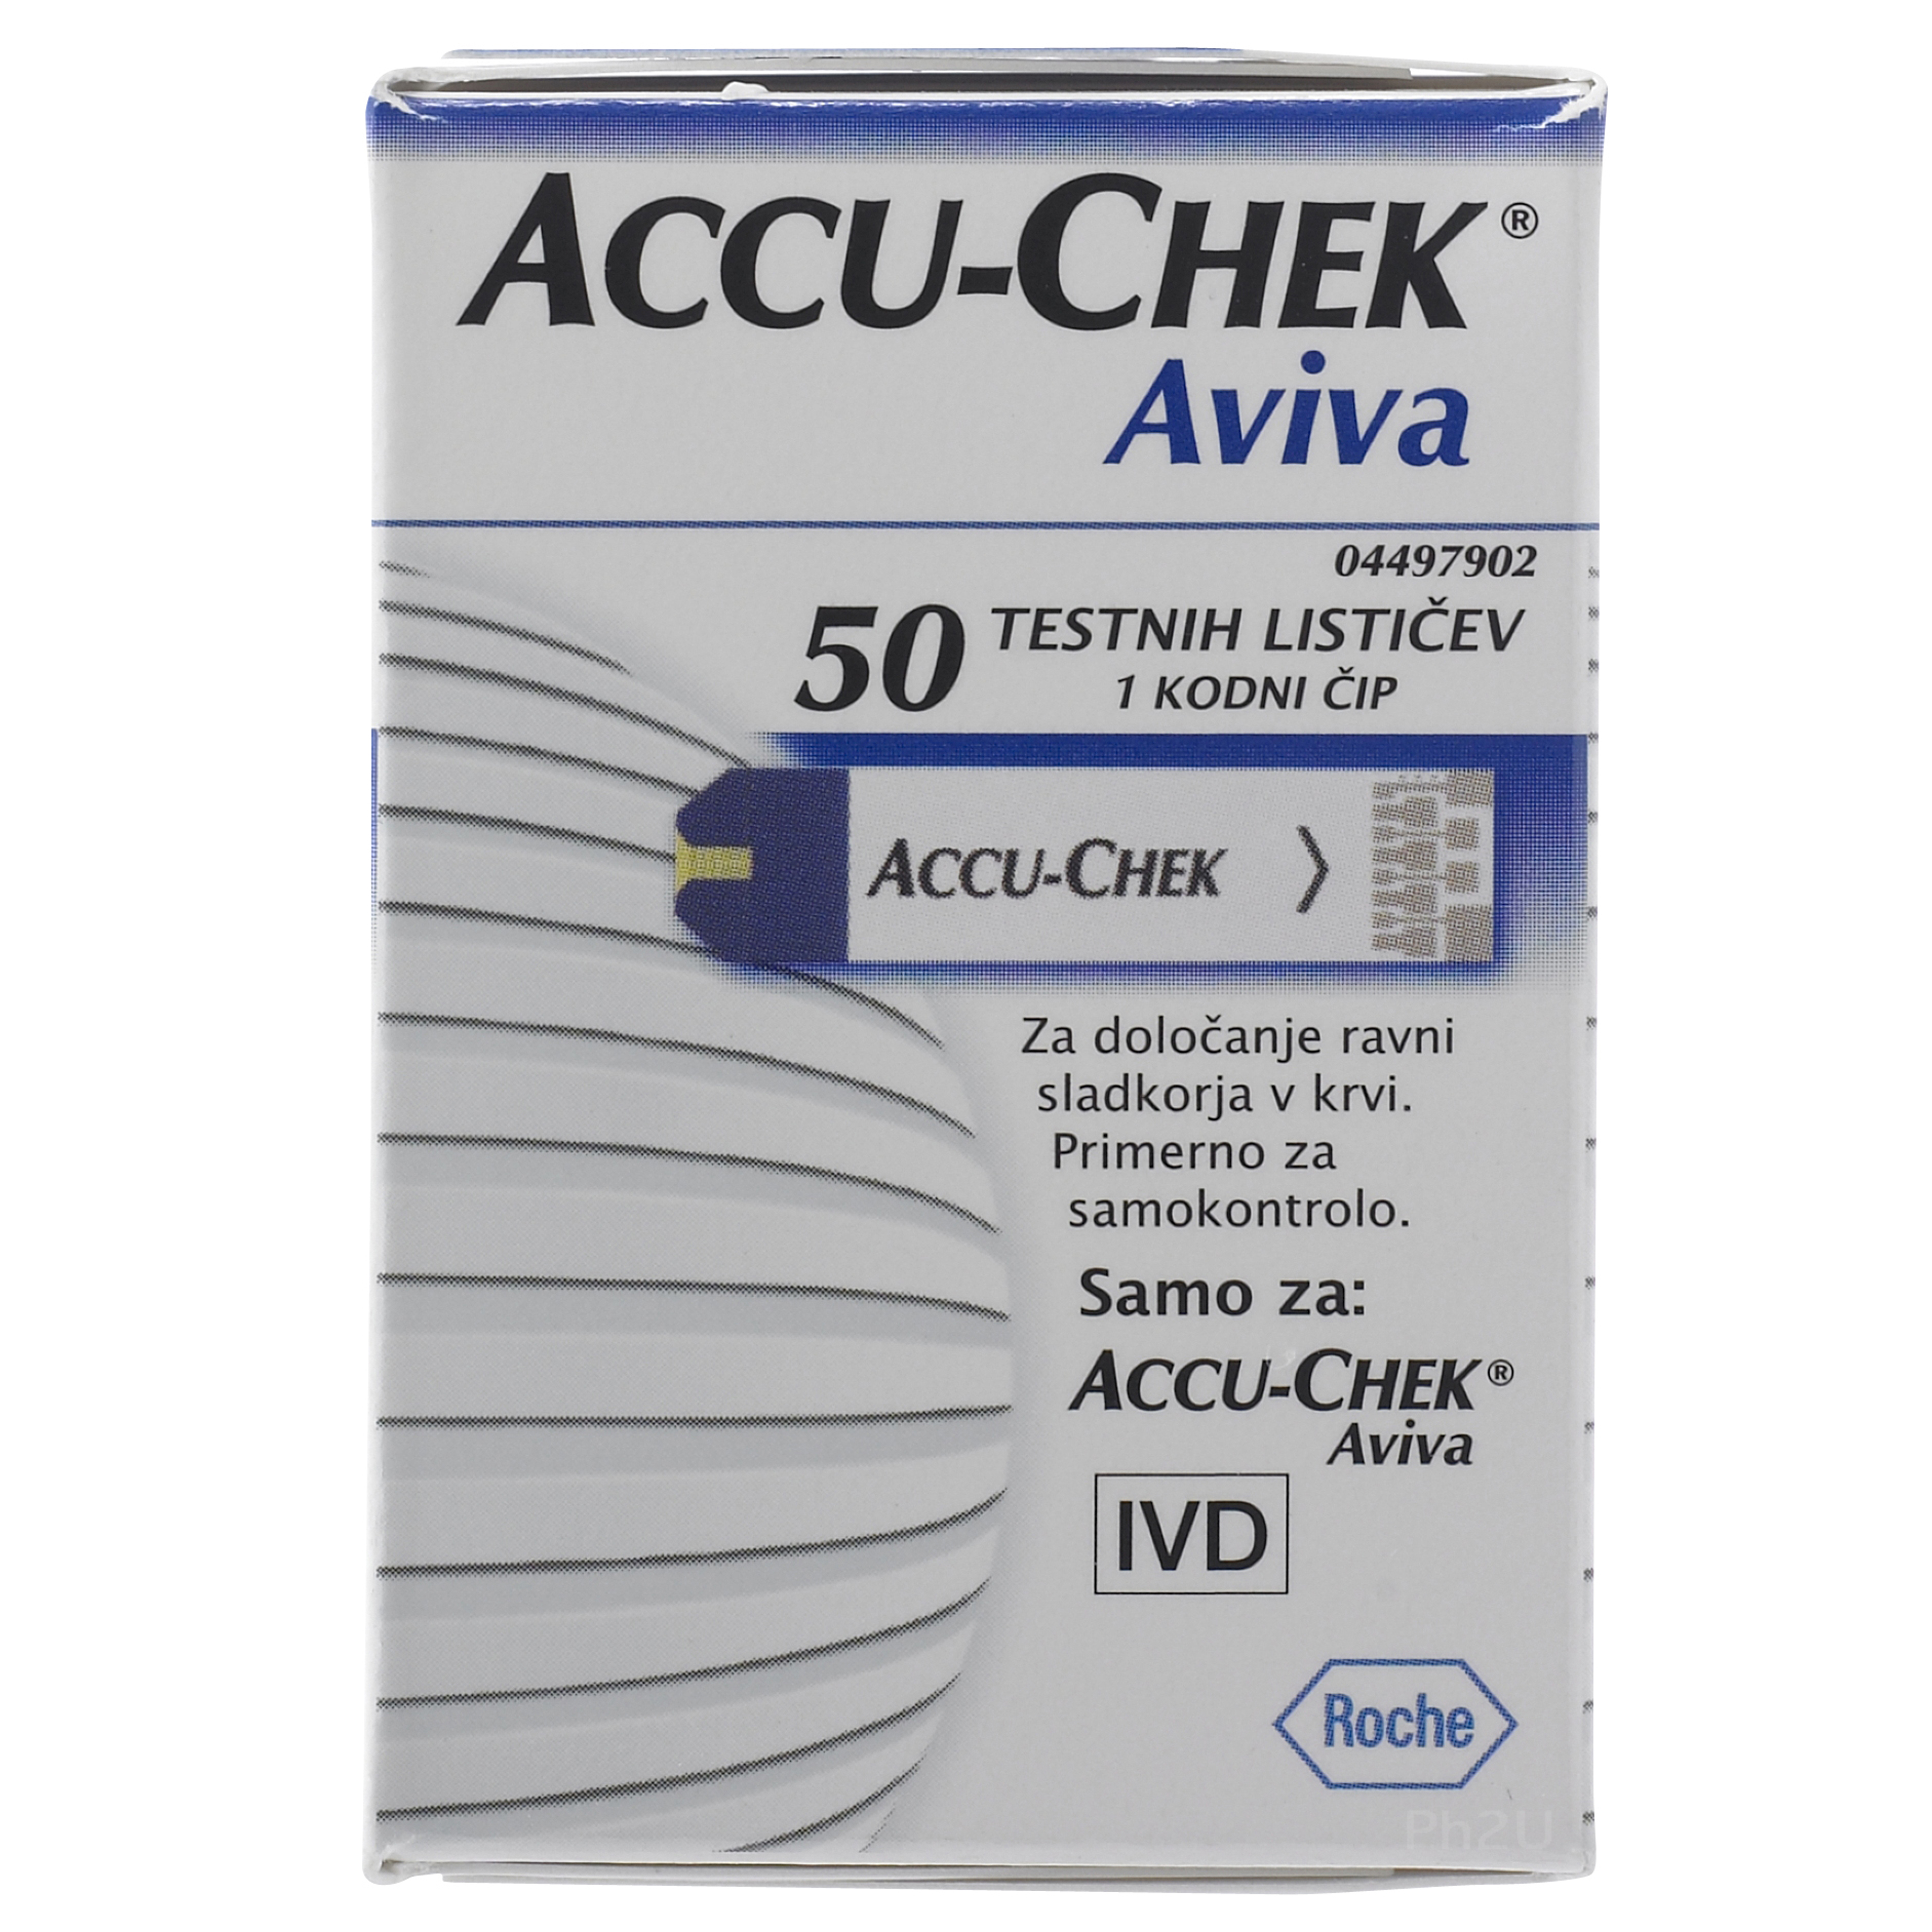 Accu-Chek Aviva Test Strips are used with the Accu-Chek System. This system is designed for testing 